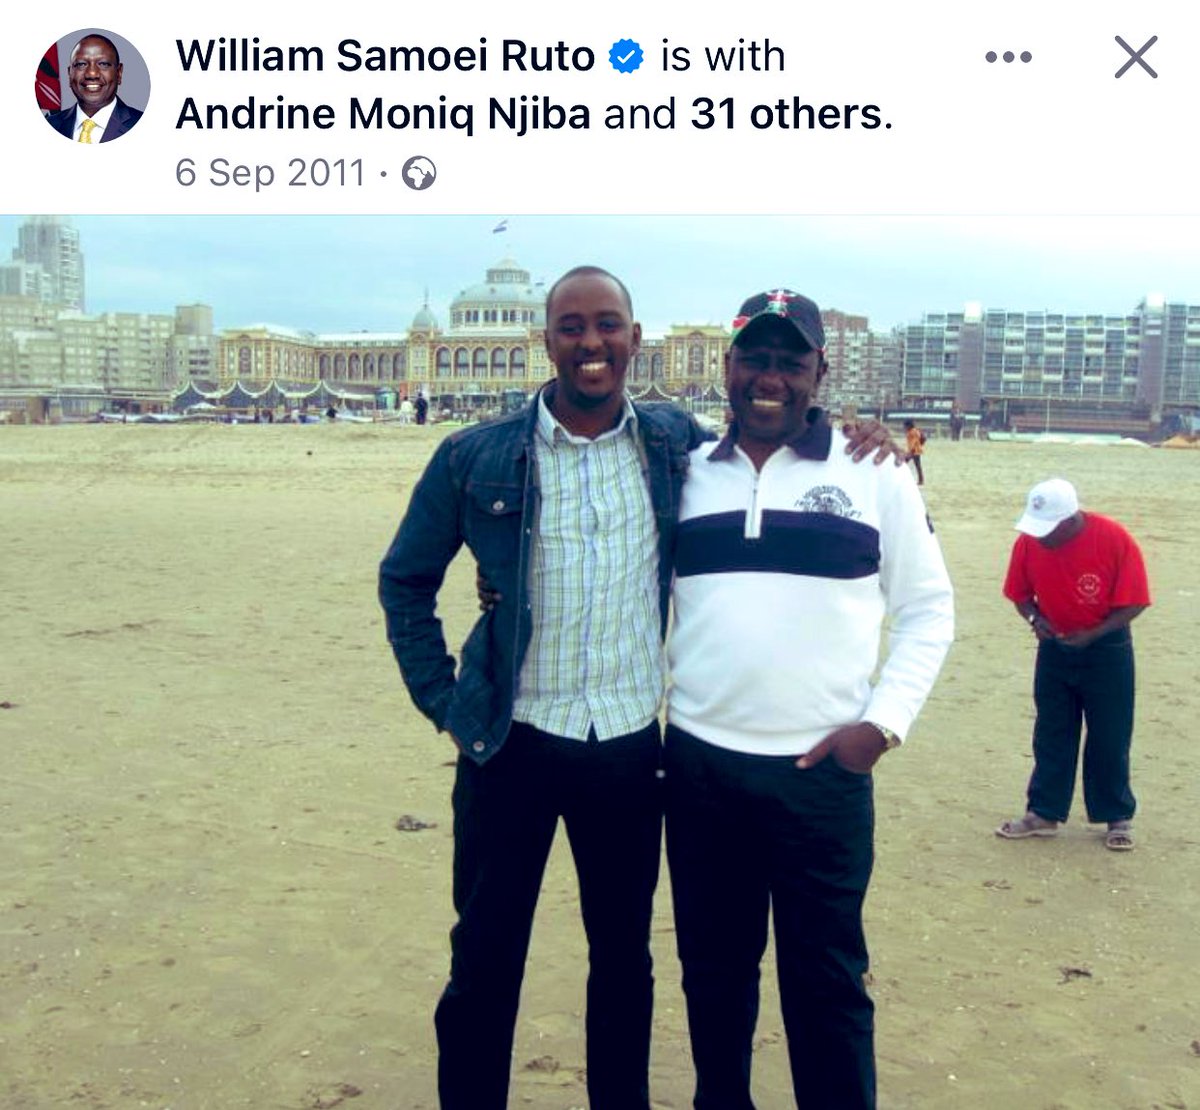 Friends since 2011. Loyalty and hardwork pays 😊. @HusseinMohamedg @WilliamsRuto